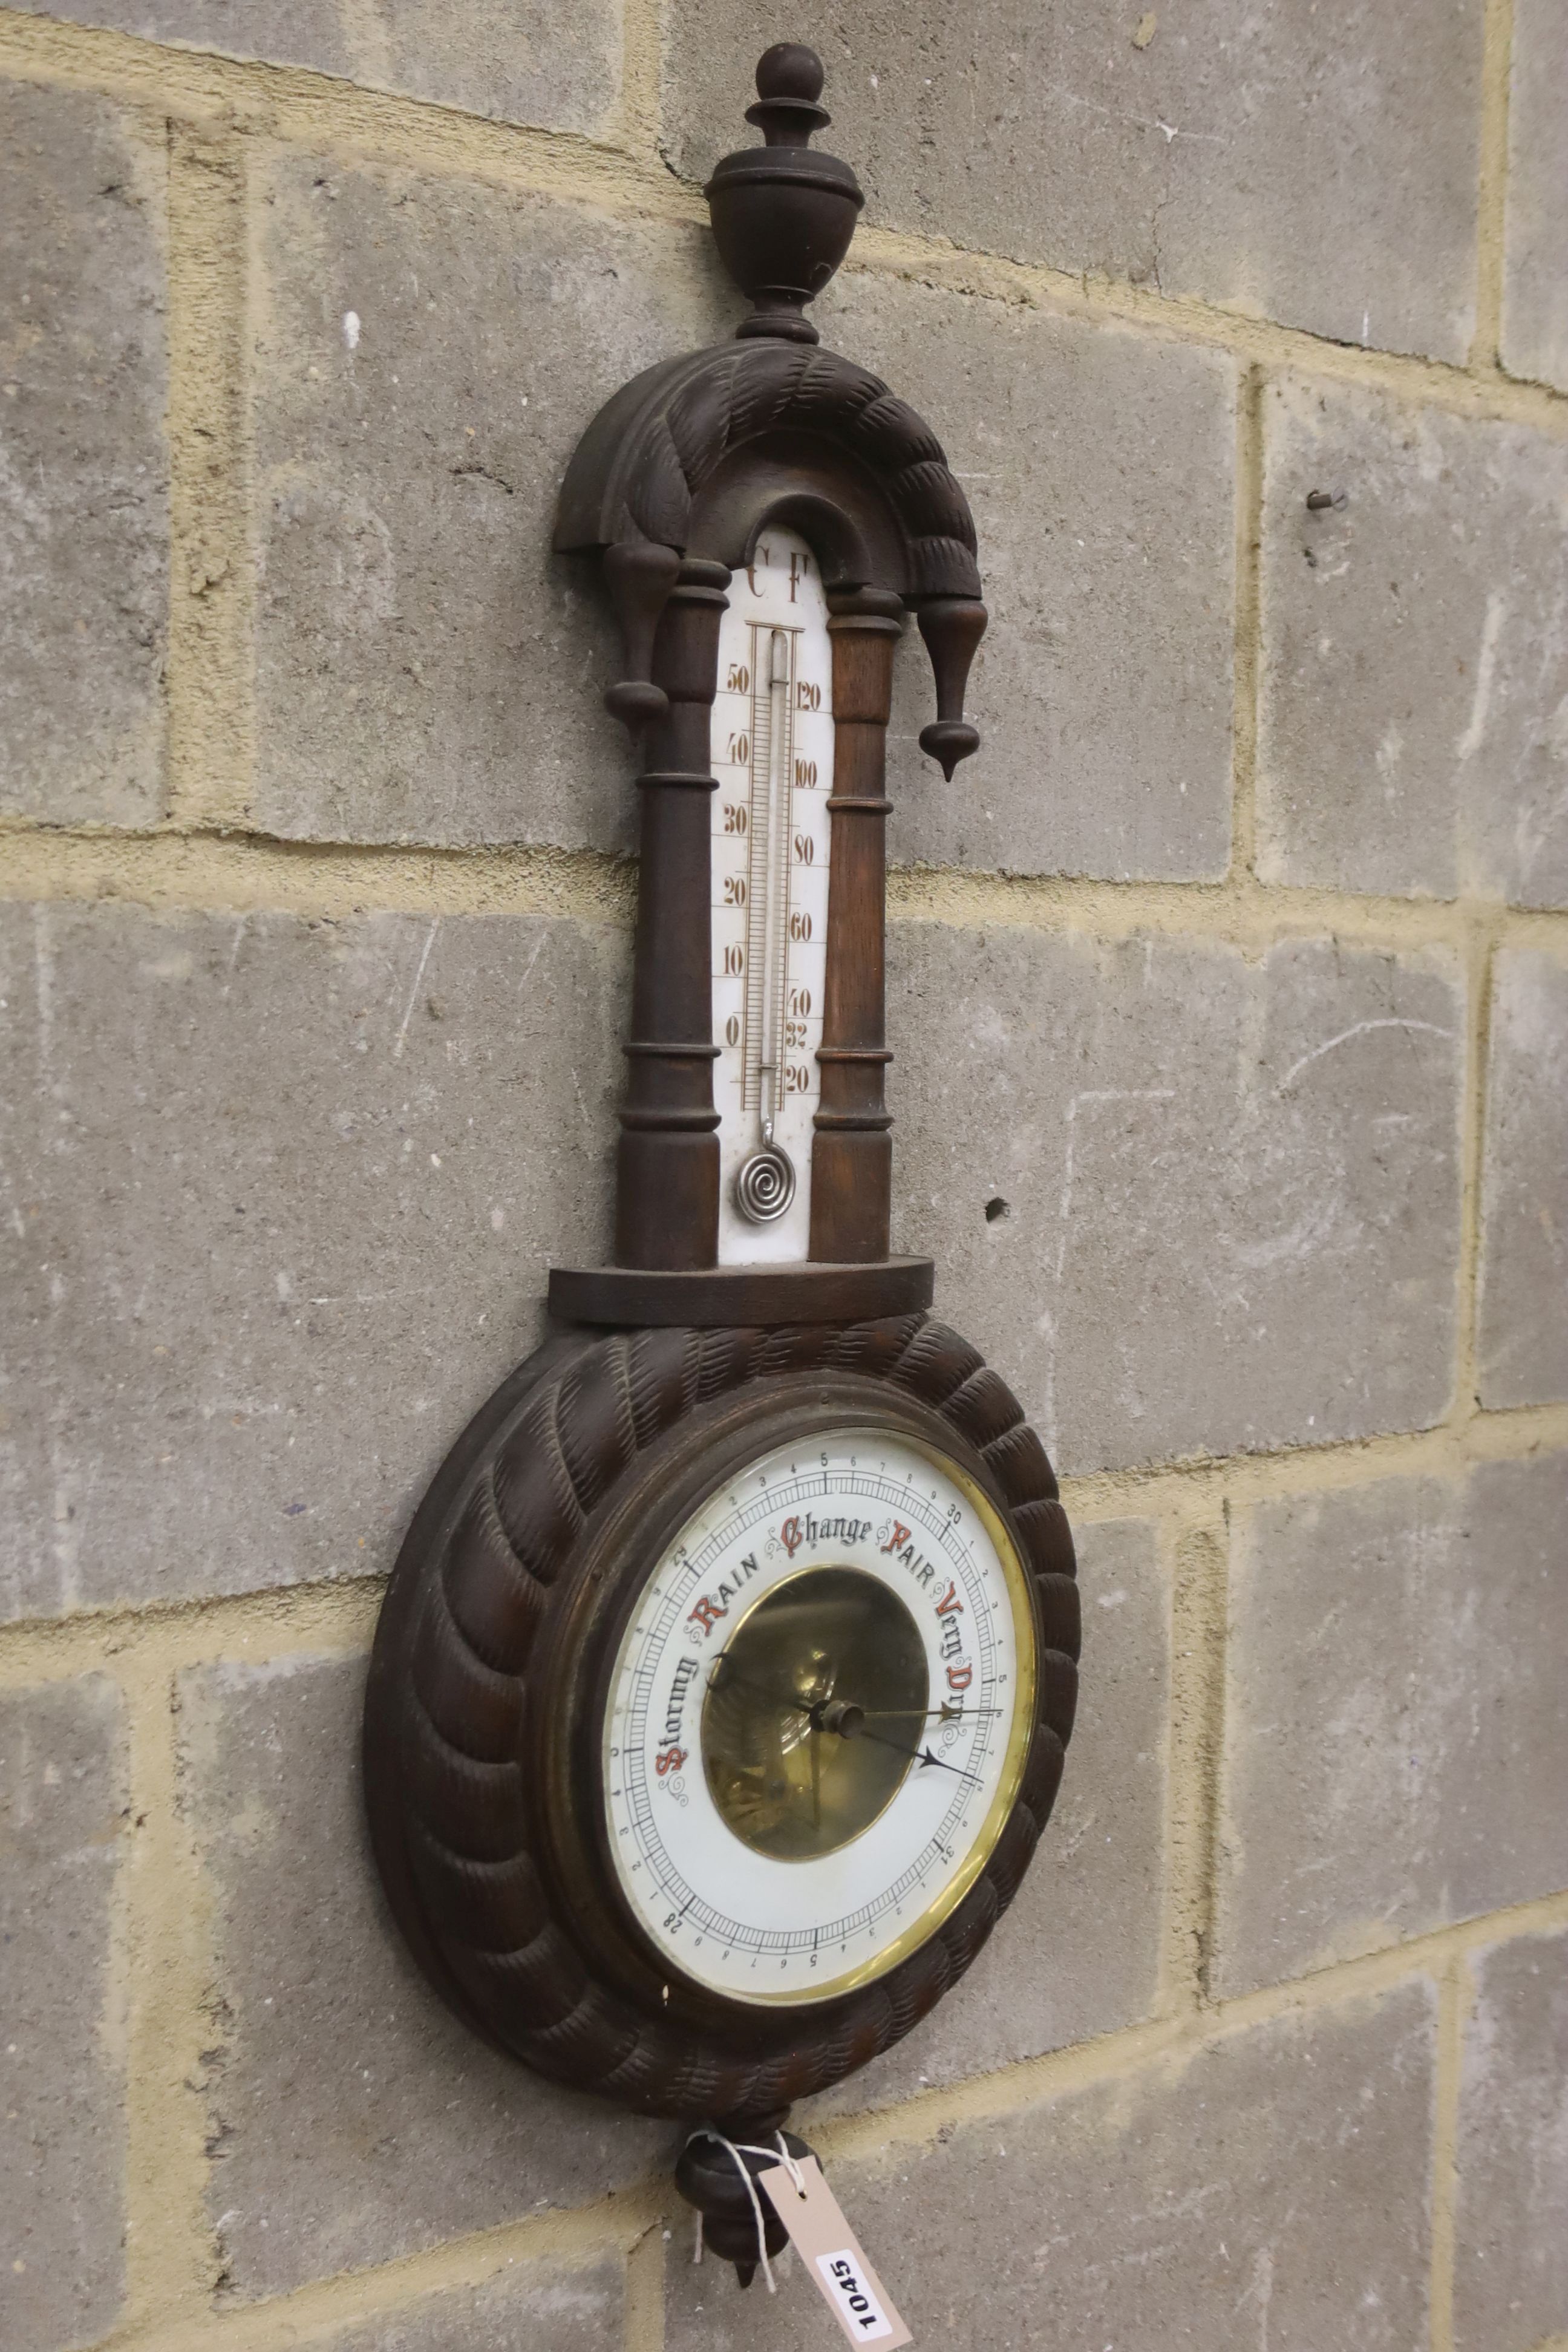 A late Victorian aneroid barometer / thermometer, height 76cm